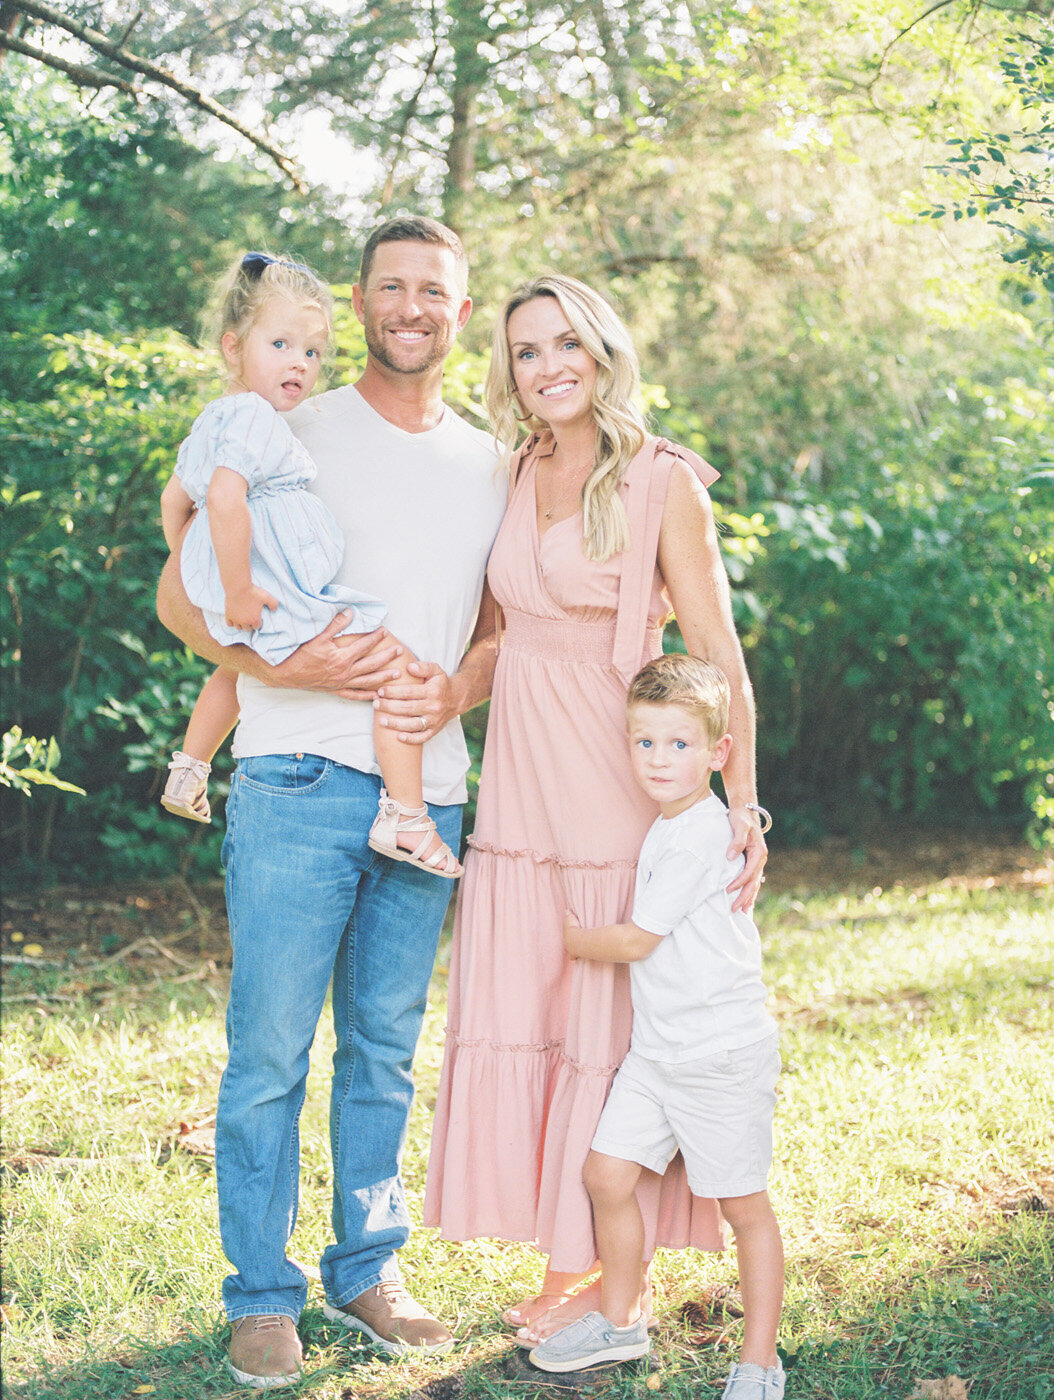 Raleigh Family Photographer | Jessica Agee Photography - 013